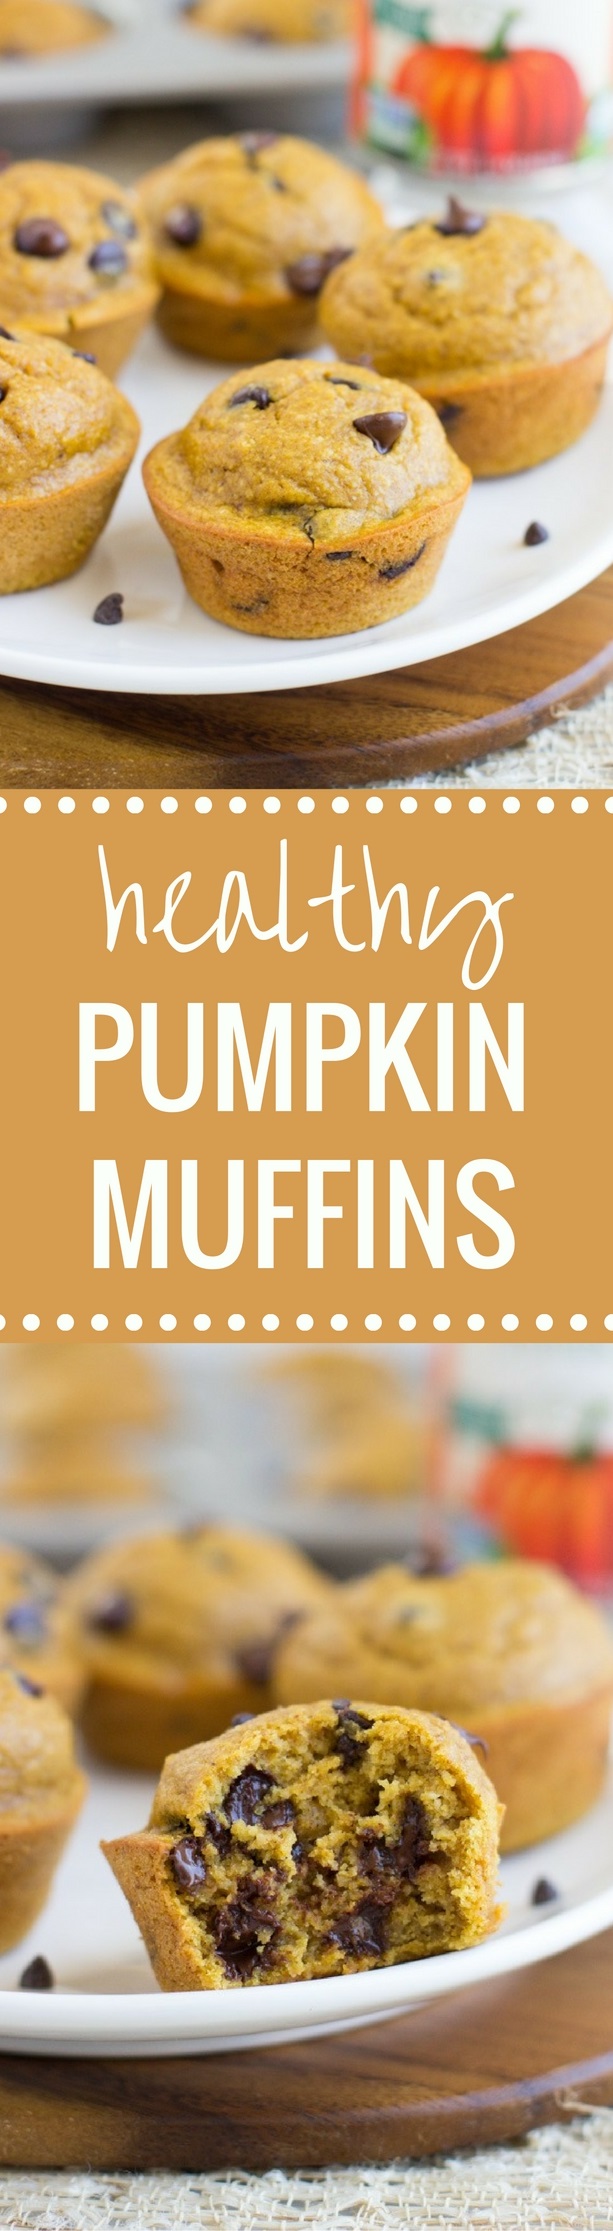  Healthy Flourless Pumpkin Muffins are moist, delicious, and super easy to make. Naturally gluten-free, oil-free, dairy-free, and refined sugar-free!